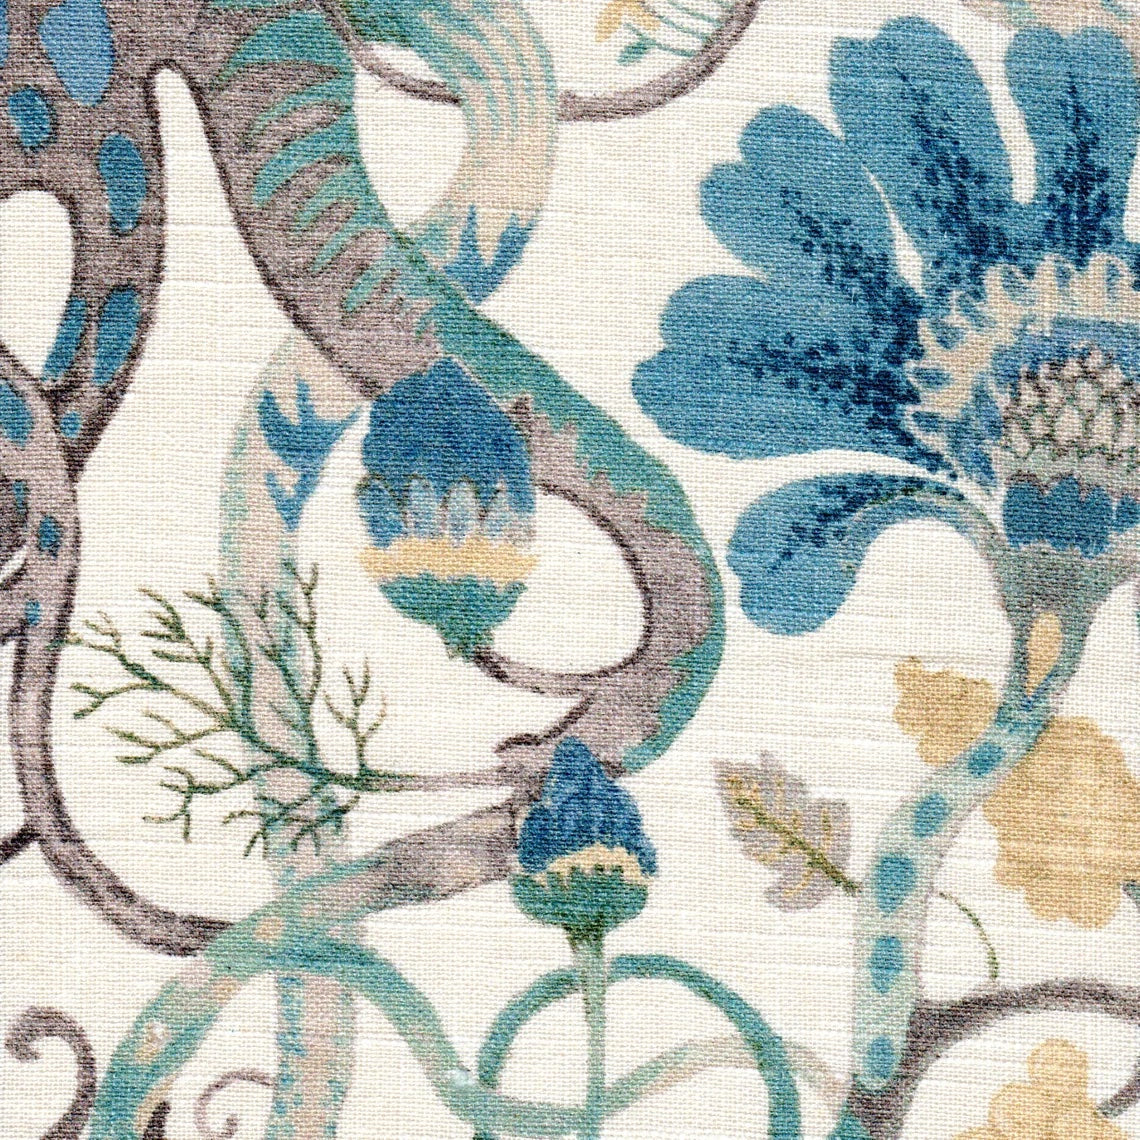 Scalloped Valance in Tudor Antique Blue Jacobean Floral, Tree of Life, Large Scale Multi-Color